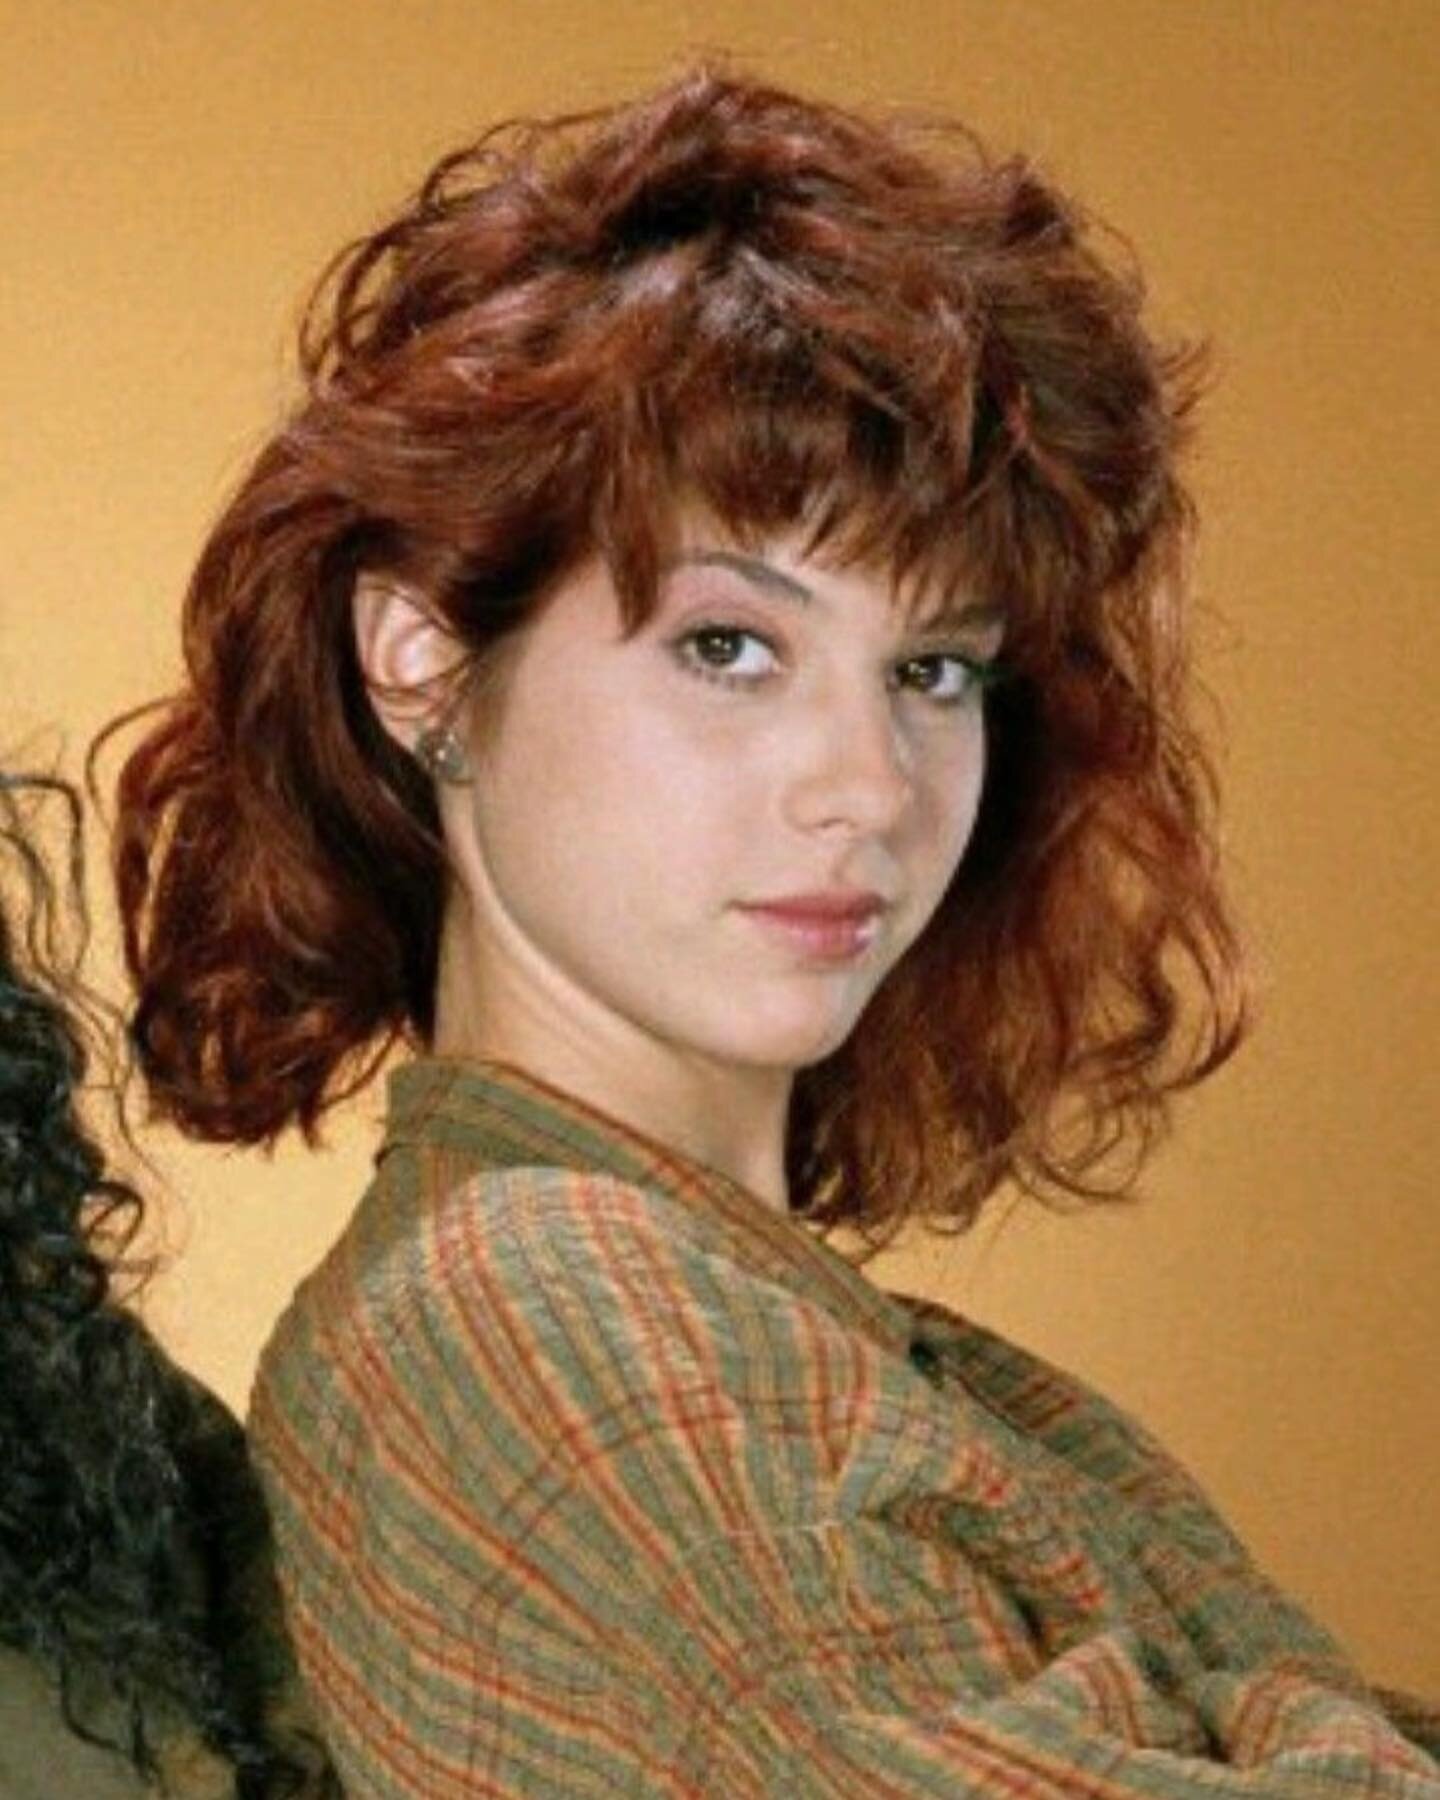 Marisa Tomei appreciation -in the film &ldquo;My Cousin Vinny, 1992
D.A. Jim Trotter: &ldquo;Ms. Vito, what is your current profession?&rdquo;
Mona Lisa Vito: &ldquo;I&rsquo;m an out-of-work hairdresser.&rdquo;

#1990s #marisatomei #mycousinvinny #sh